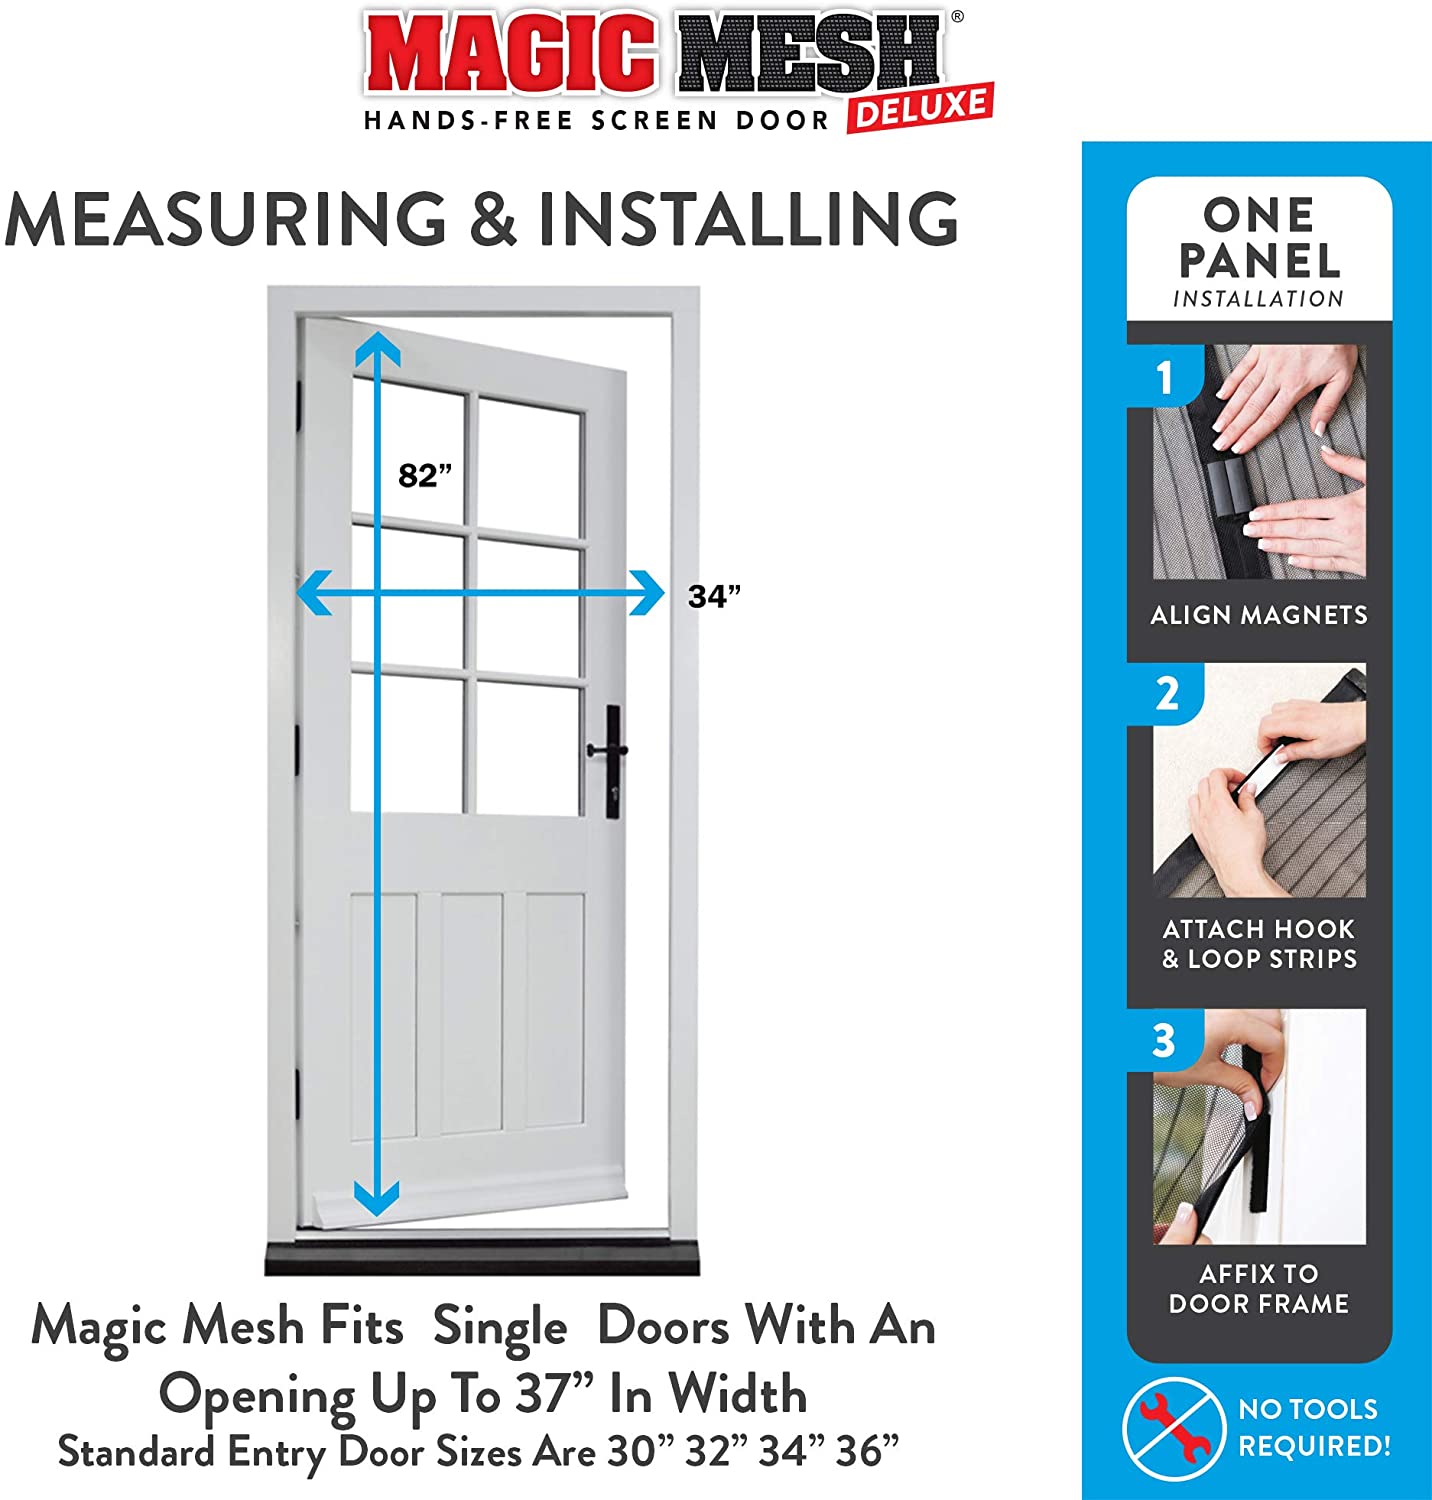 Use Magic Mesh To Screen-in A Porch - Brian's Home Repairs